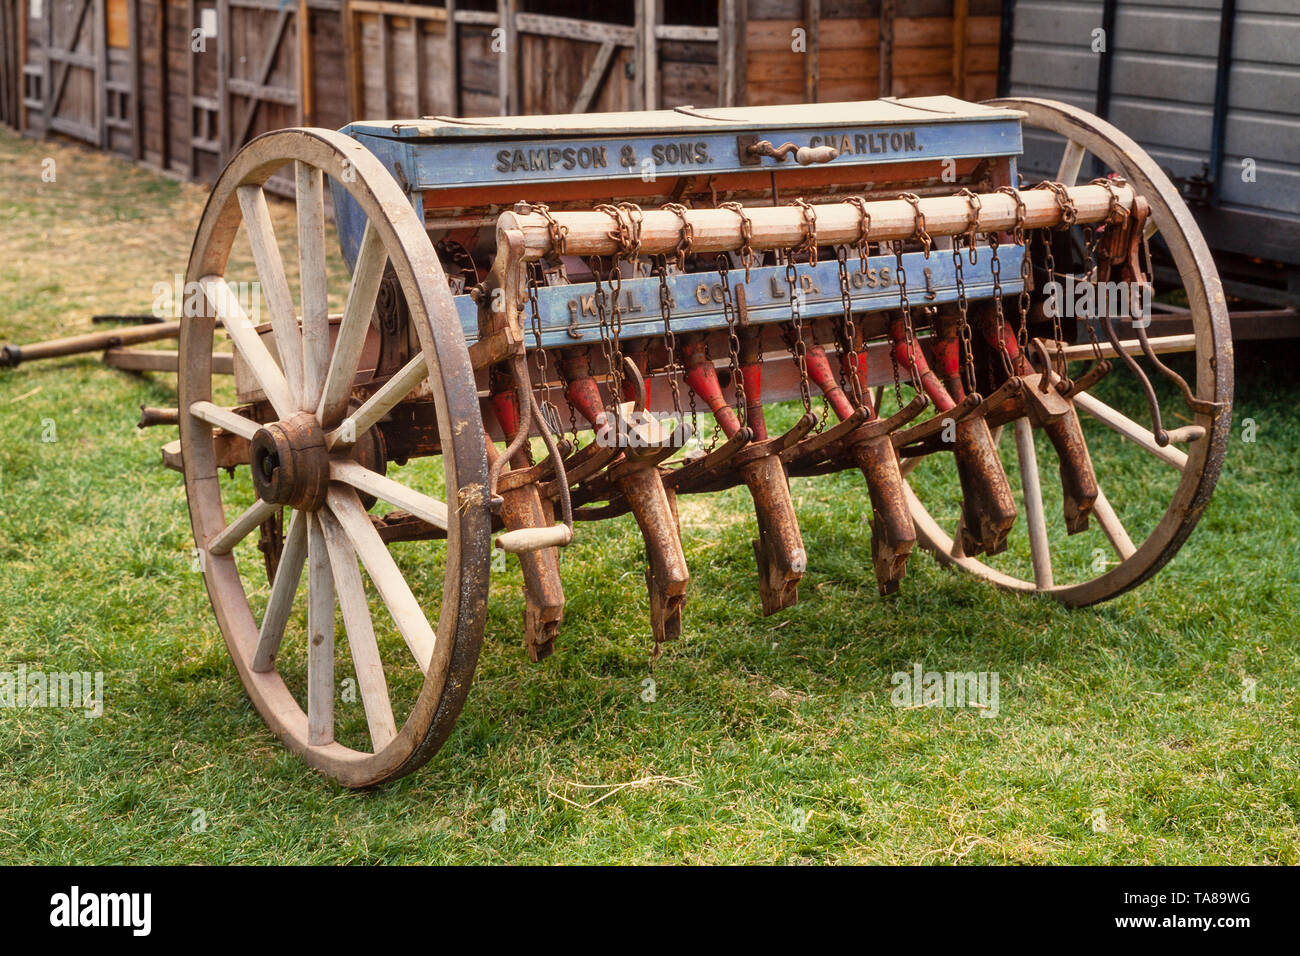 Early agricultural farming sowing machine, drill seed sowing machine, pulled by horse Stock Photo